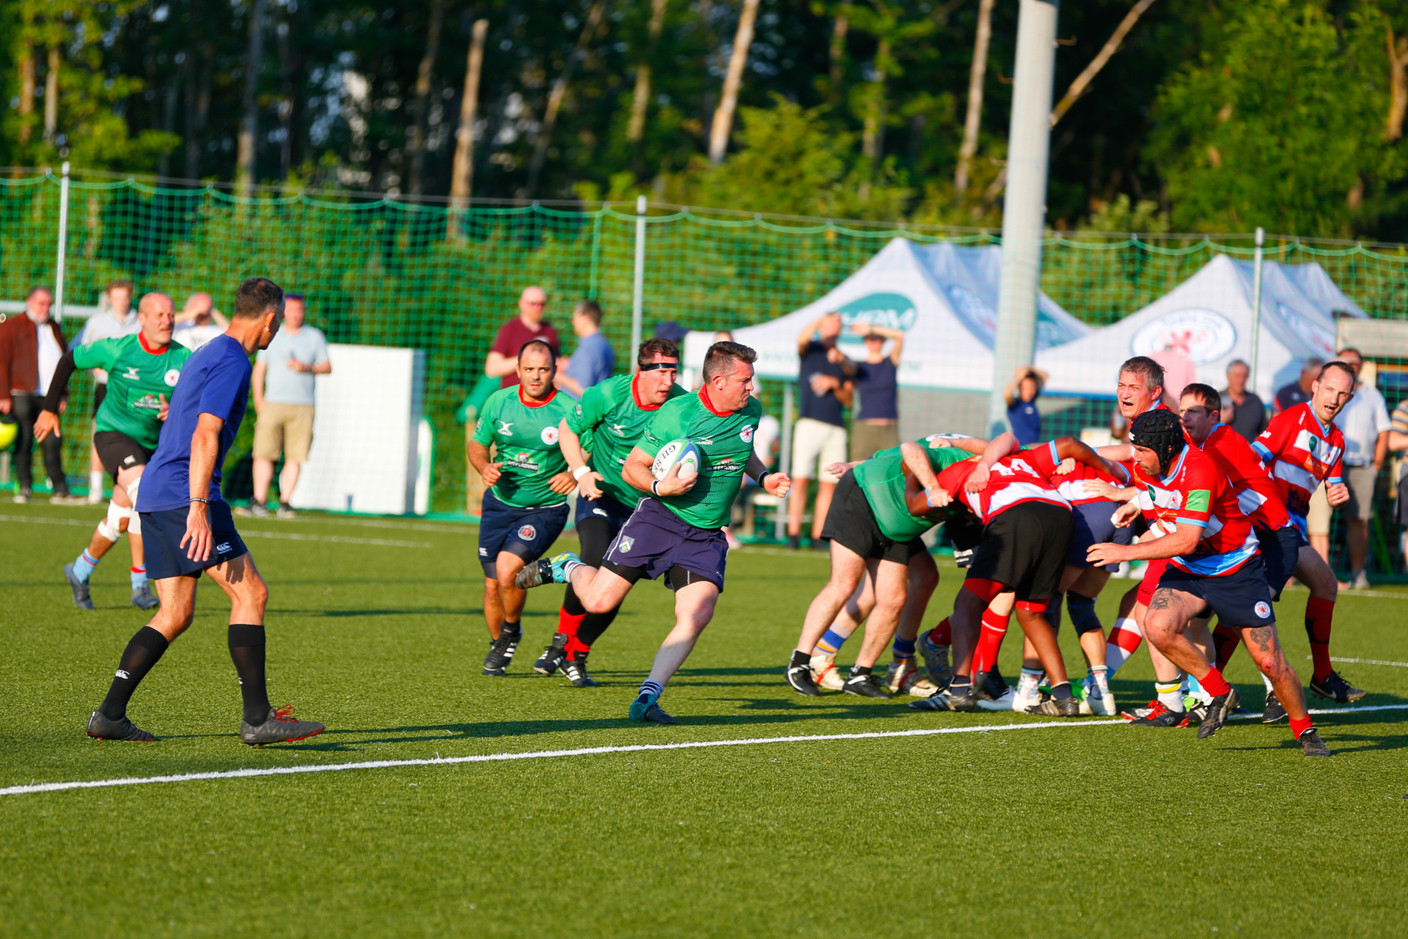 Rugby Club Luxembourg veterans play a friendly game at the club’s stadium in Cessange.  Photo: Craig Griffiths